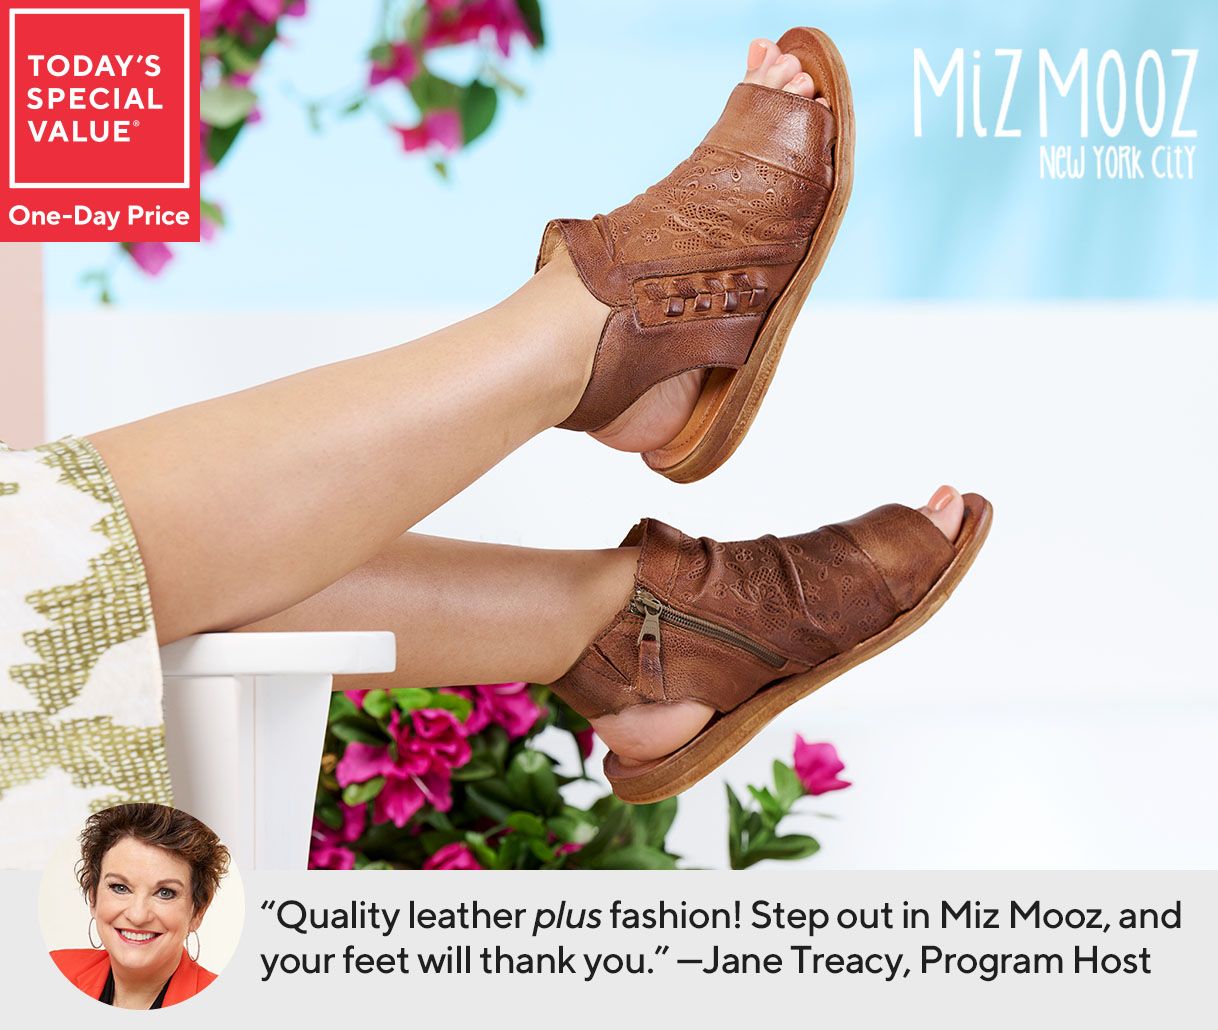 Today's Special Value® One-Day Price  “Quality leather plus fashion! Step out in Miz Mooz, and your feet will thank you.” —Jane Treacy, Program Host